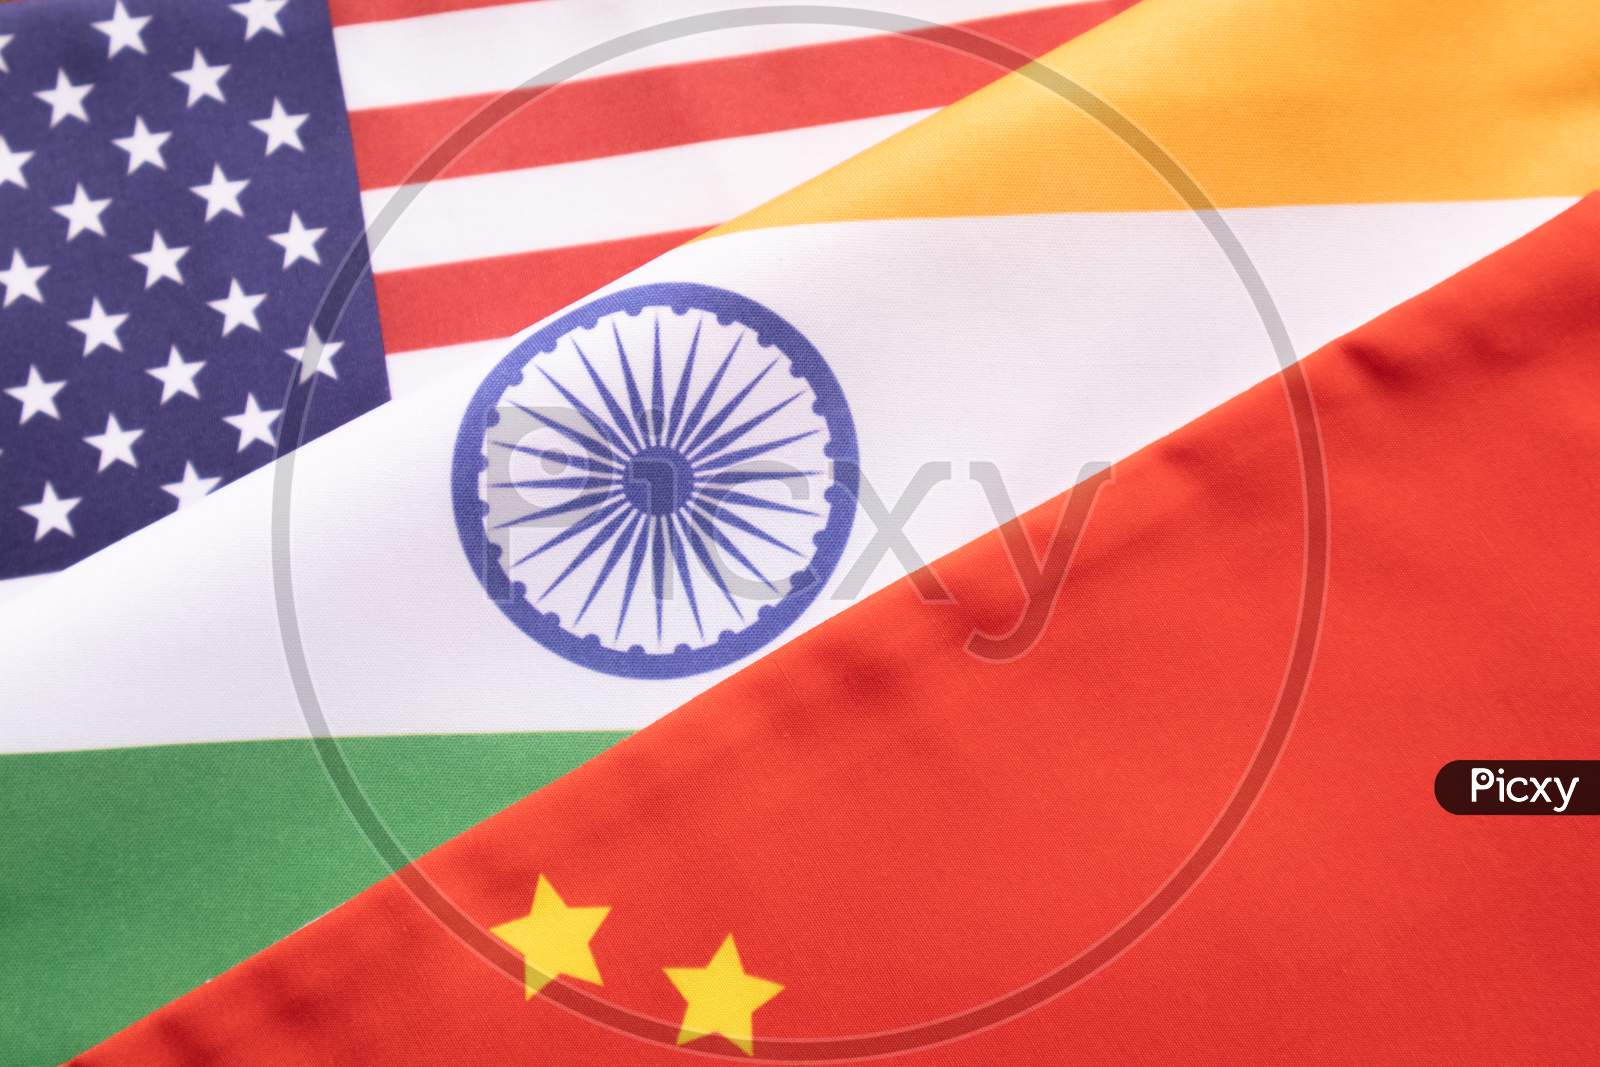 Concept of India, USA, and China relations showing with flags.